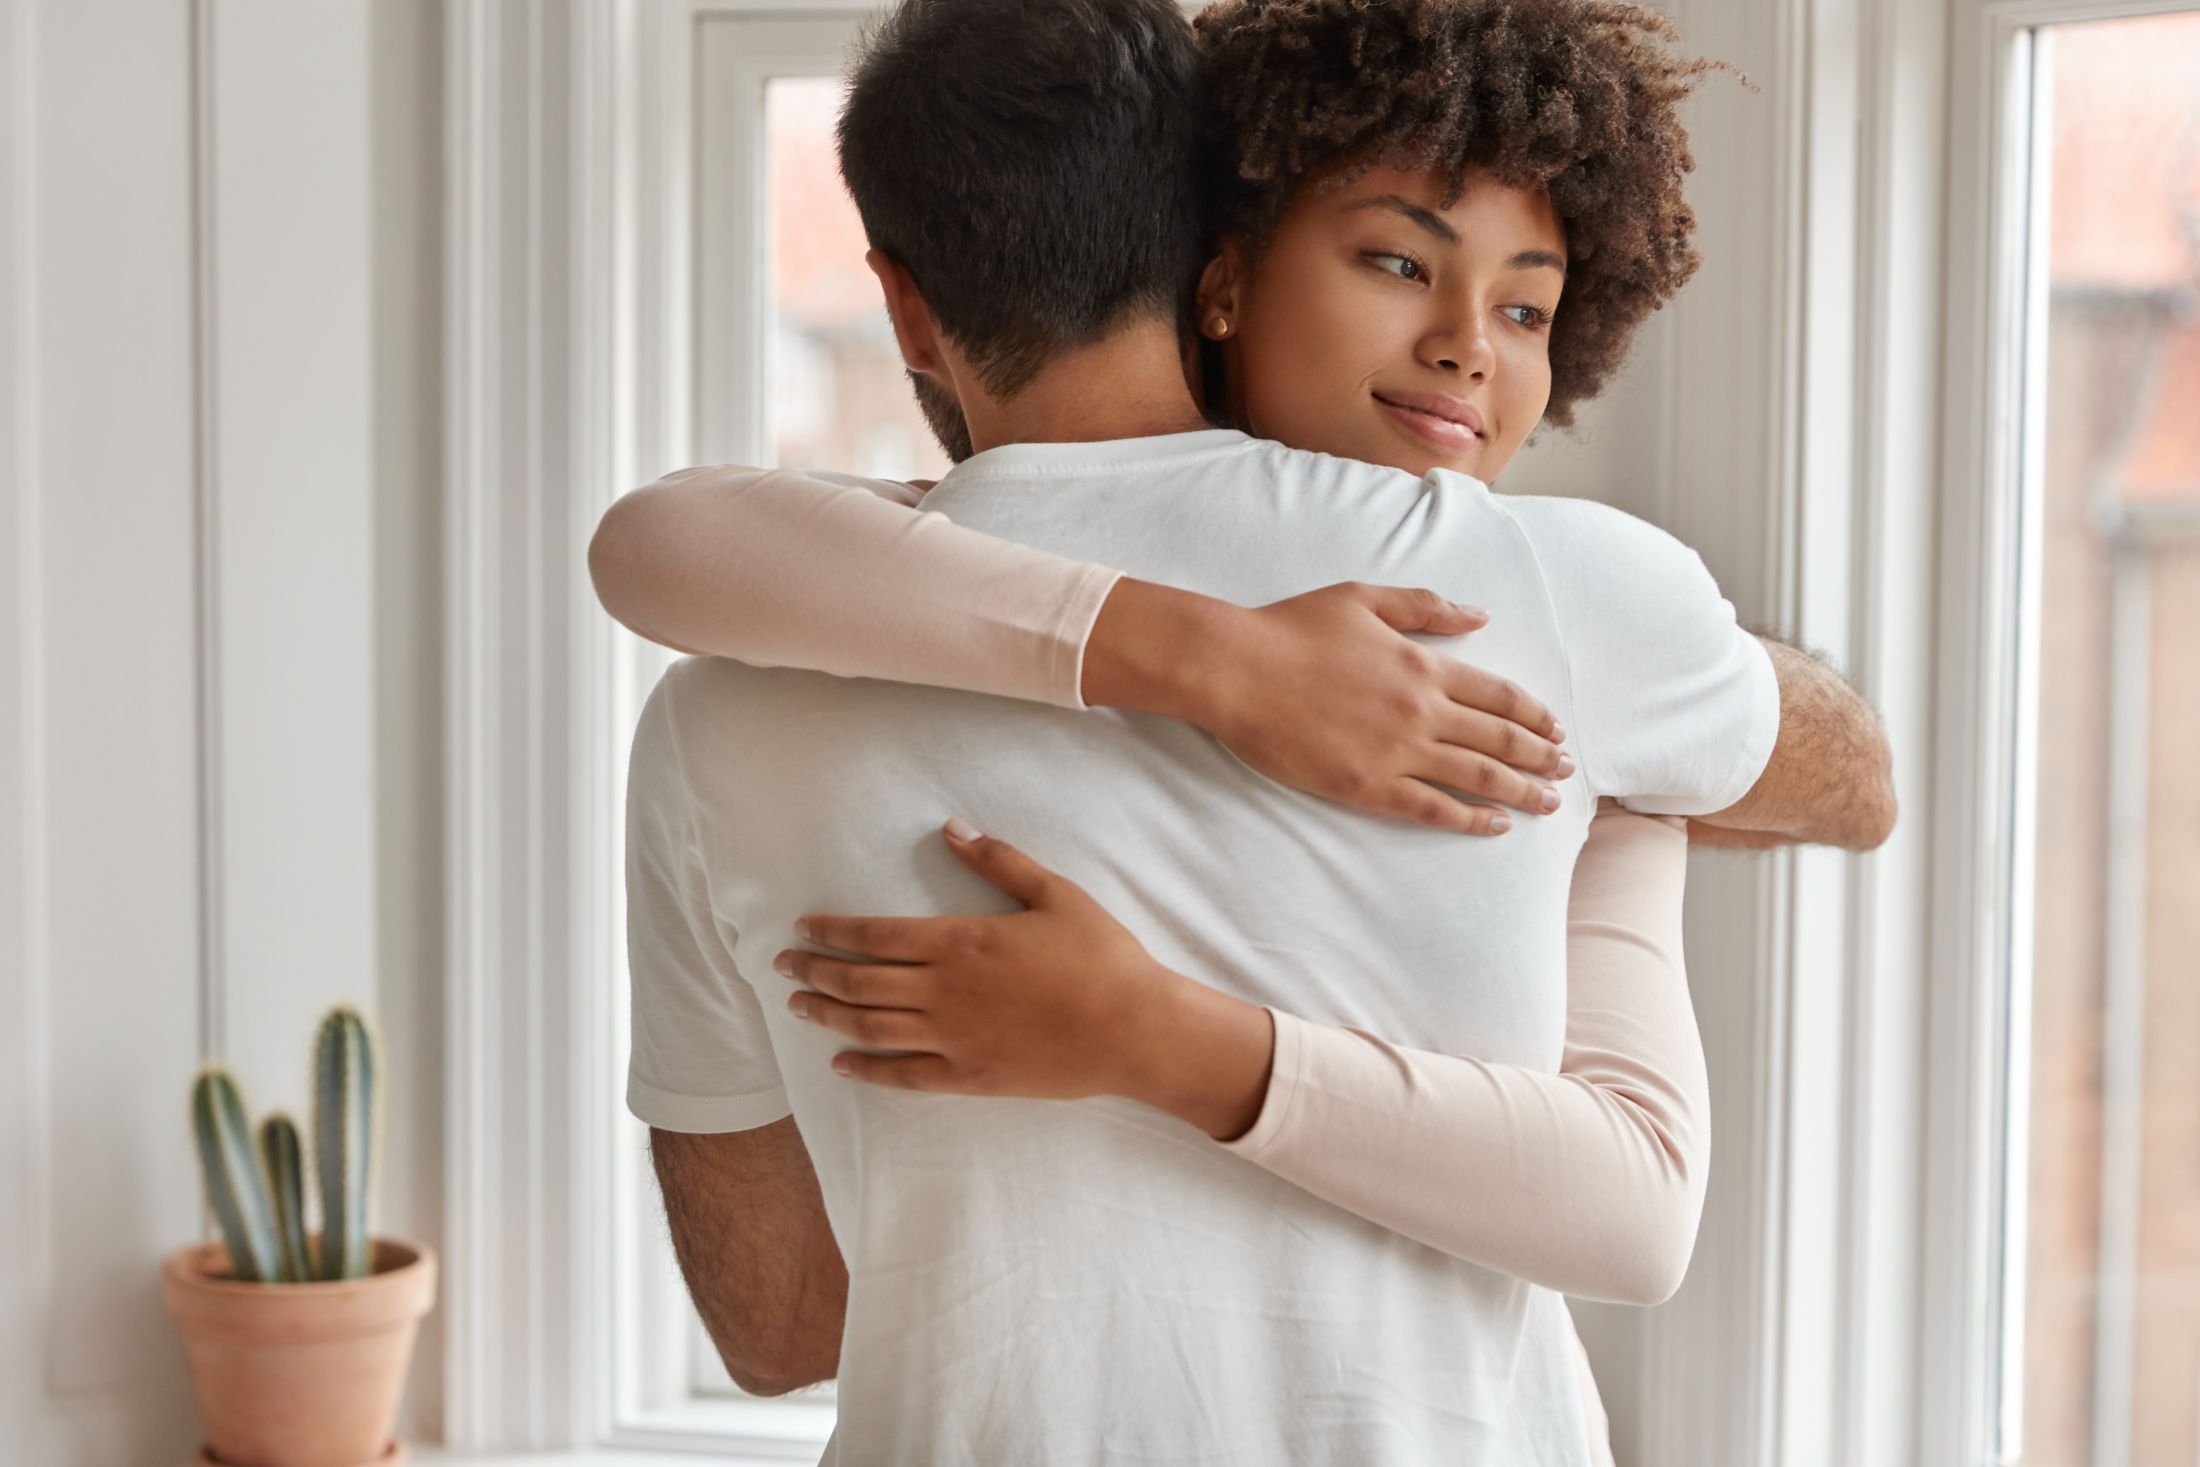 happy-mixed-race-couple-embrace-each-other-express-support-and-love-have-friendly-relationships-pose-near-window-in-living-room-enjoy-togetherness-diverse-boyfriend-and-girlfriend-hug-indoor.jpg